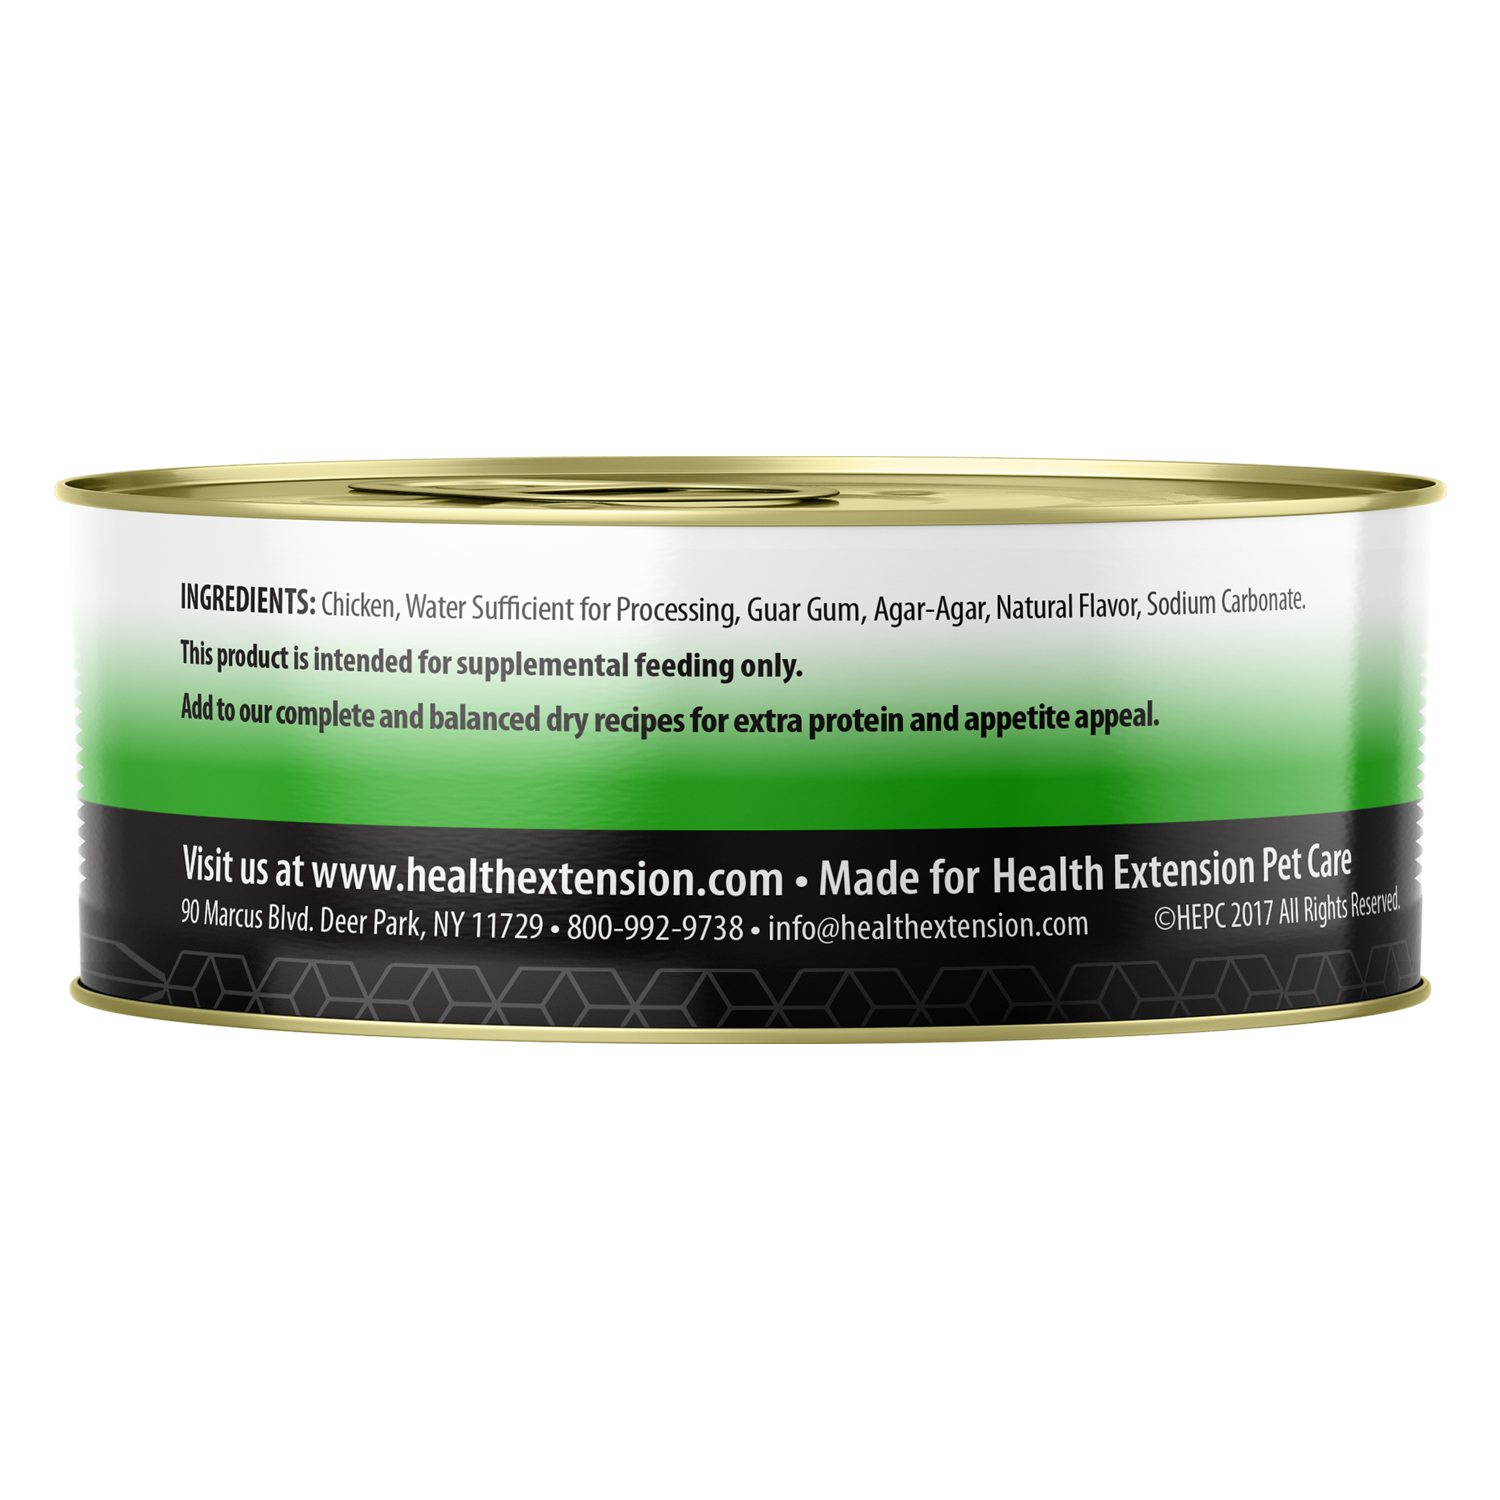 95% Chicken 5.5 ounce Side of Can showing ingredients list & Health Extension contact info